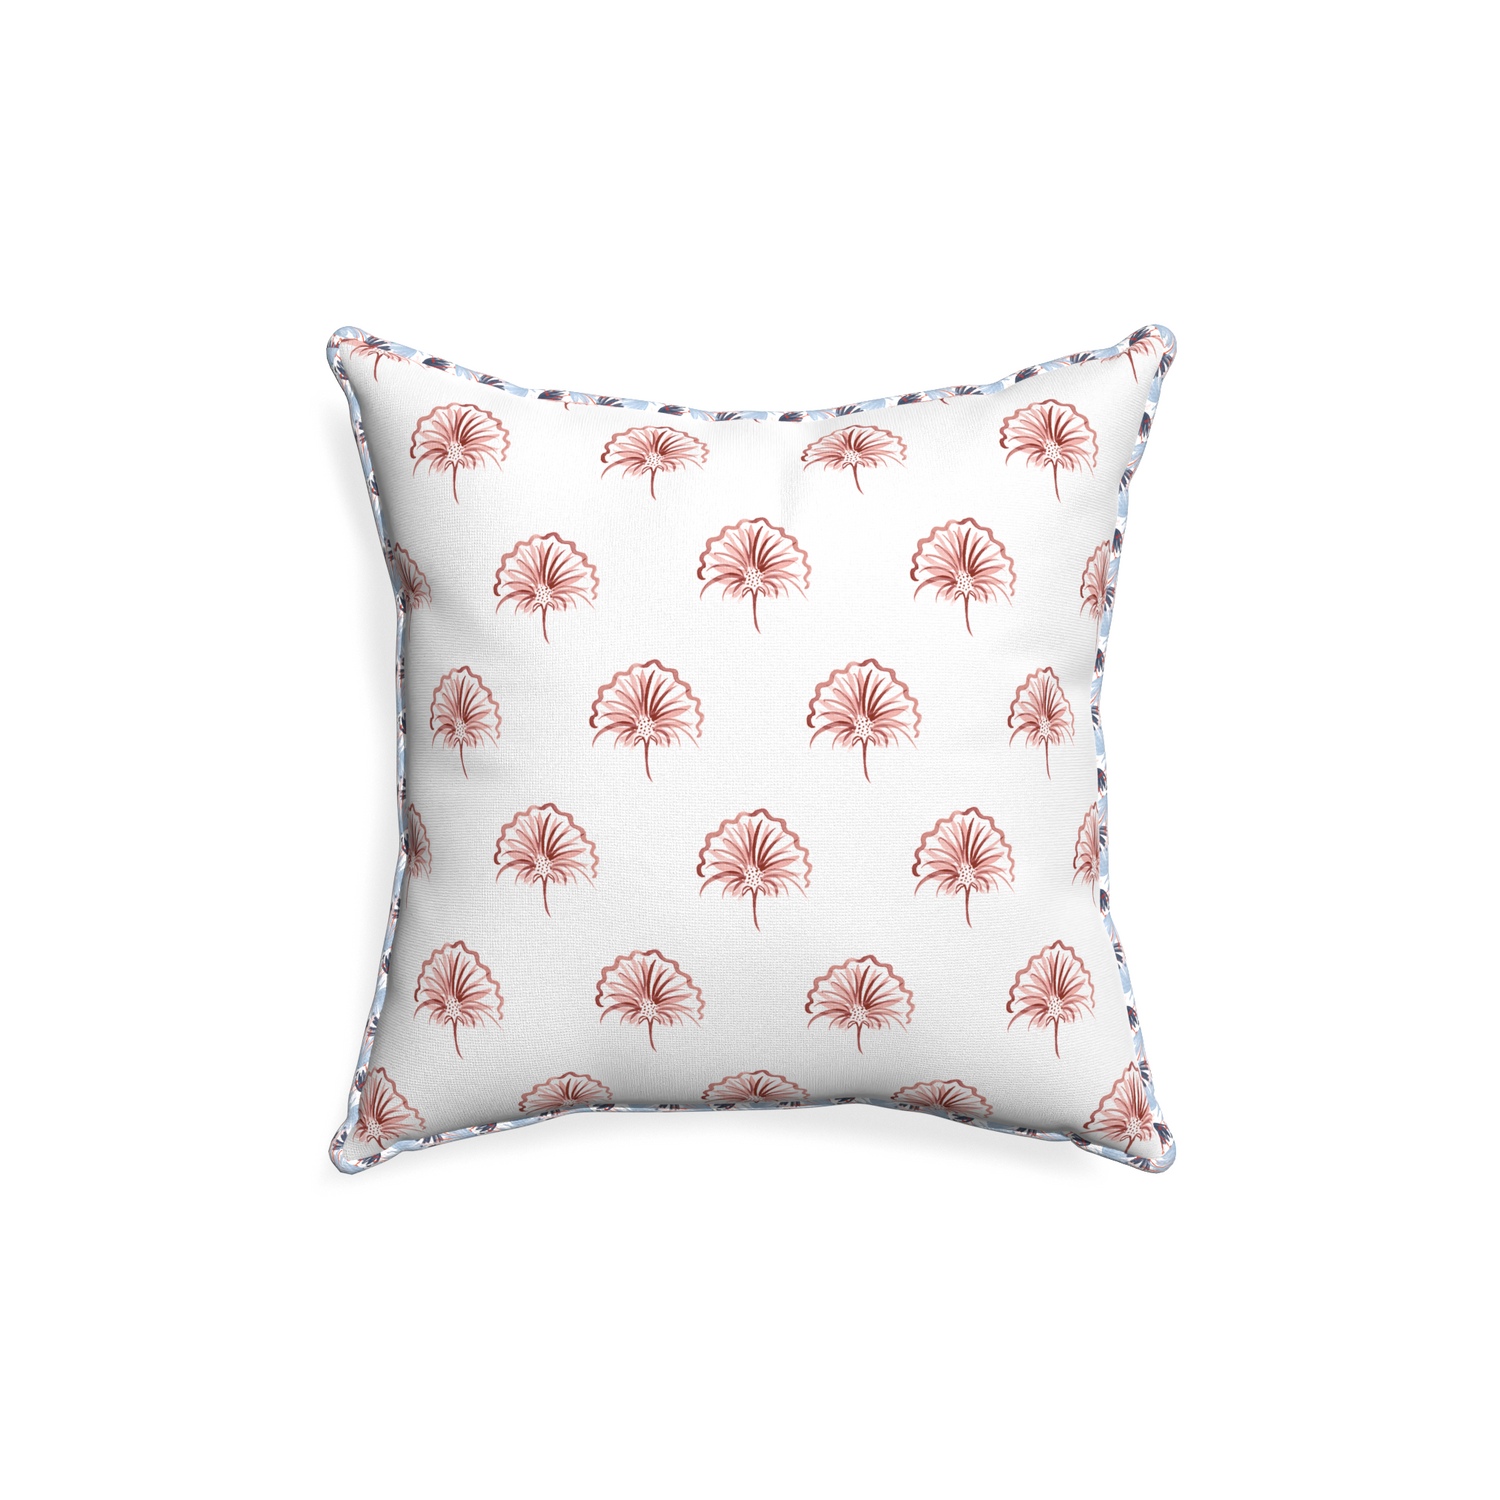 18-square penelope rose custom pillow with e piping on white background